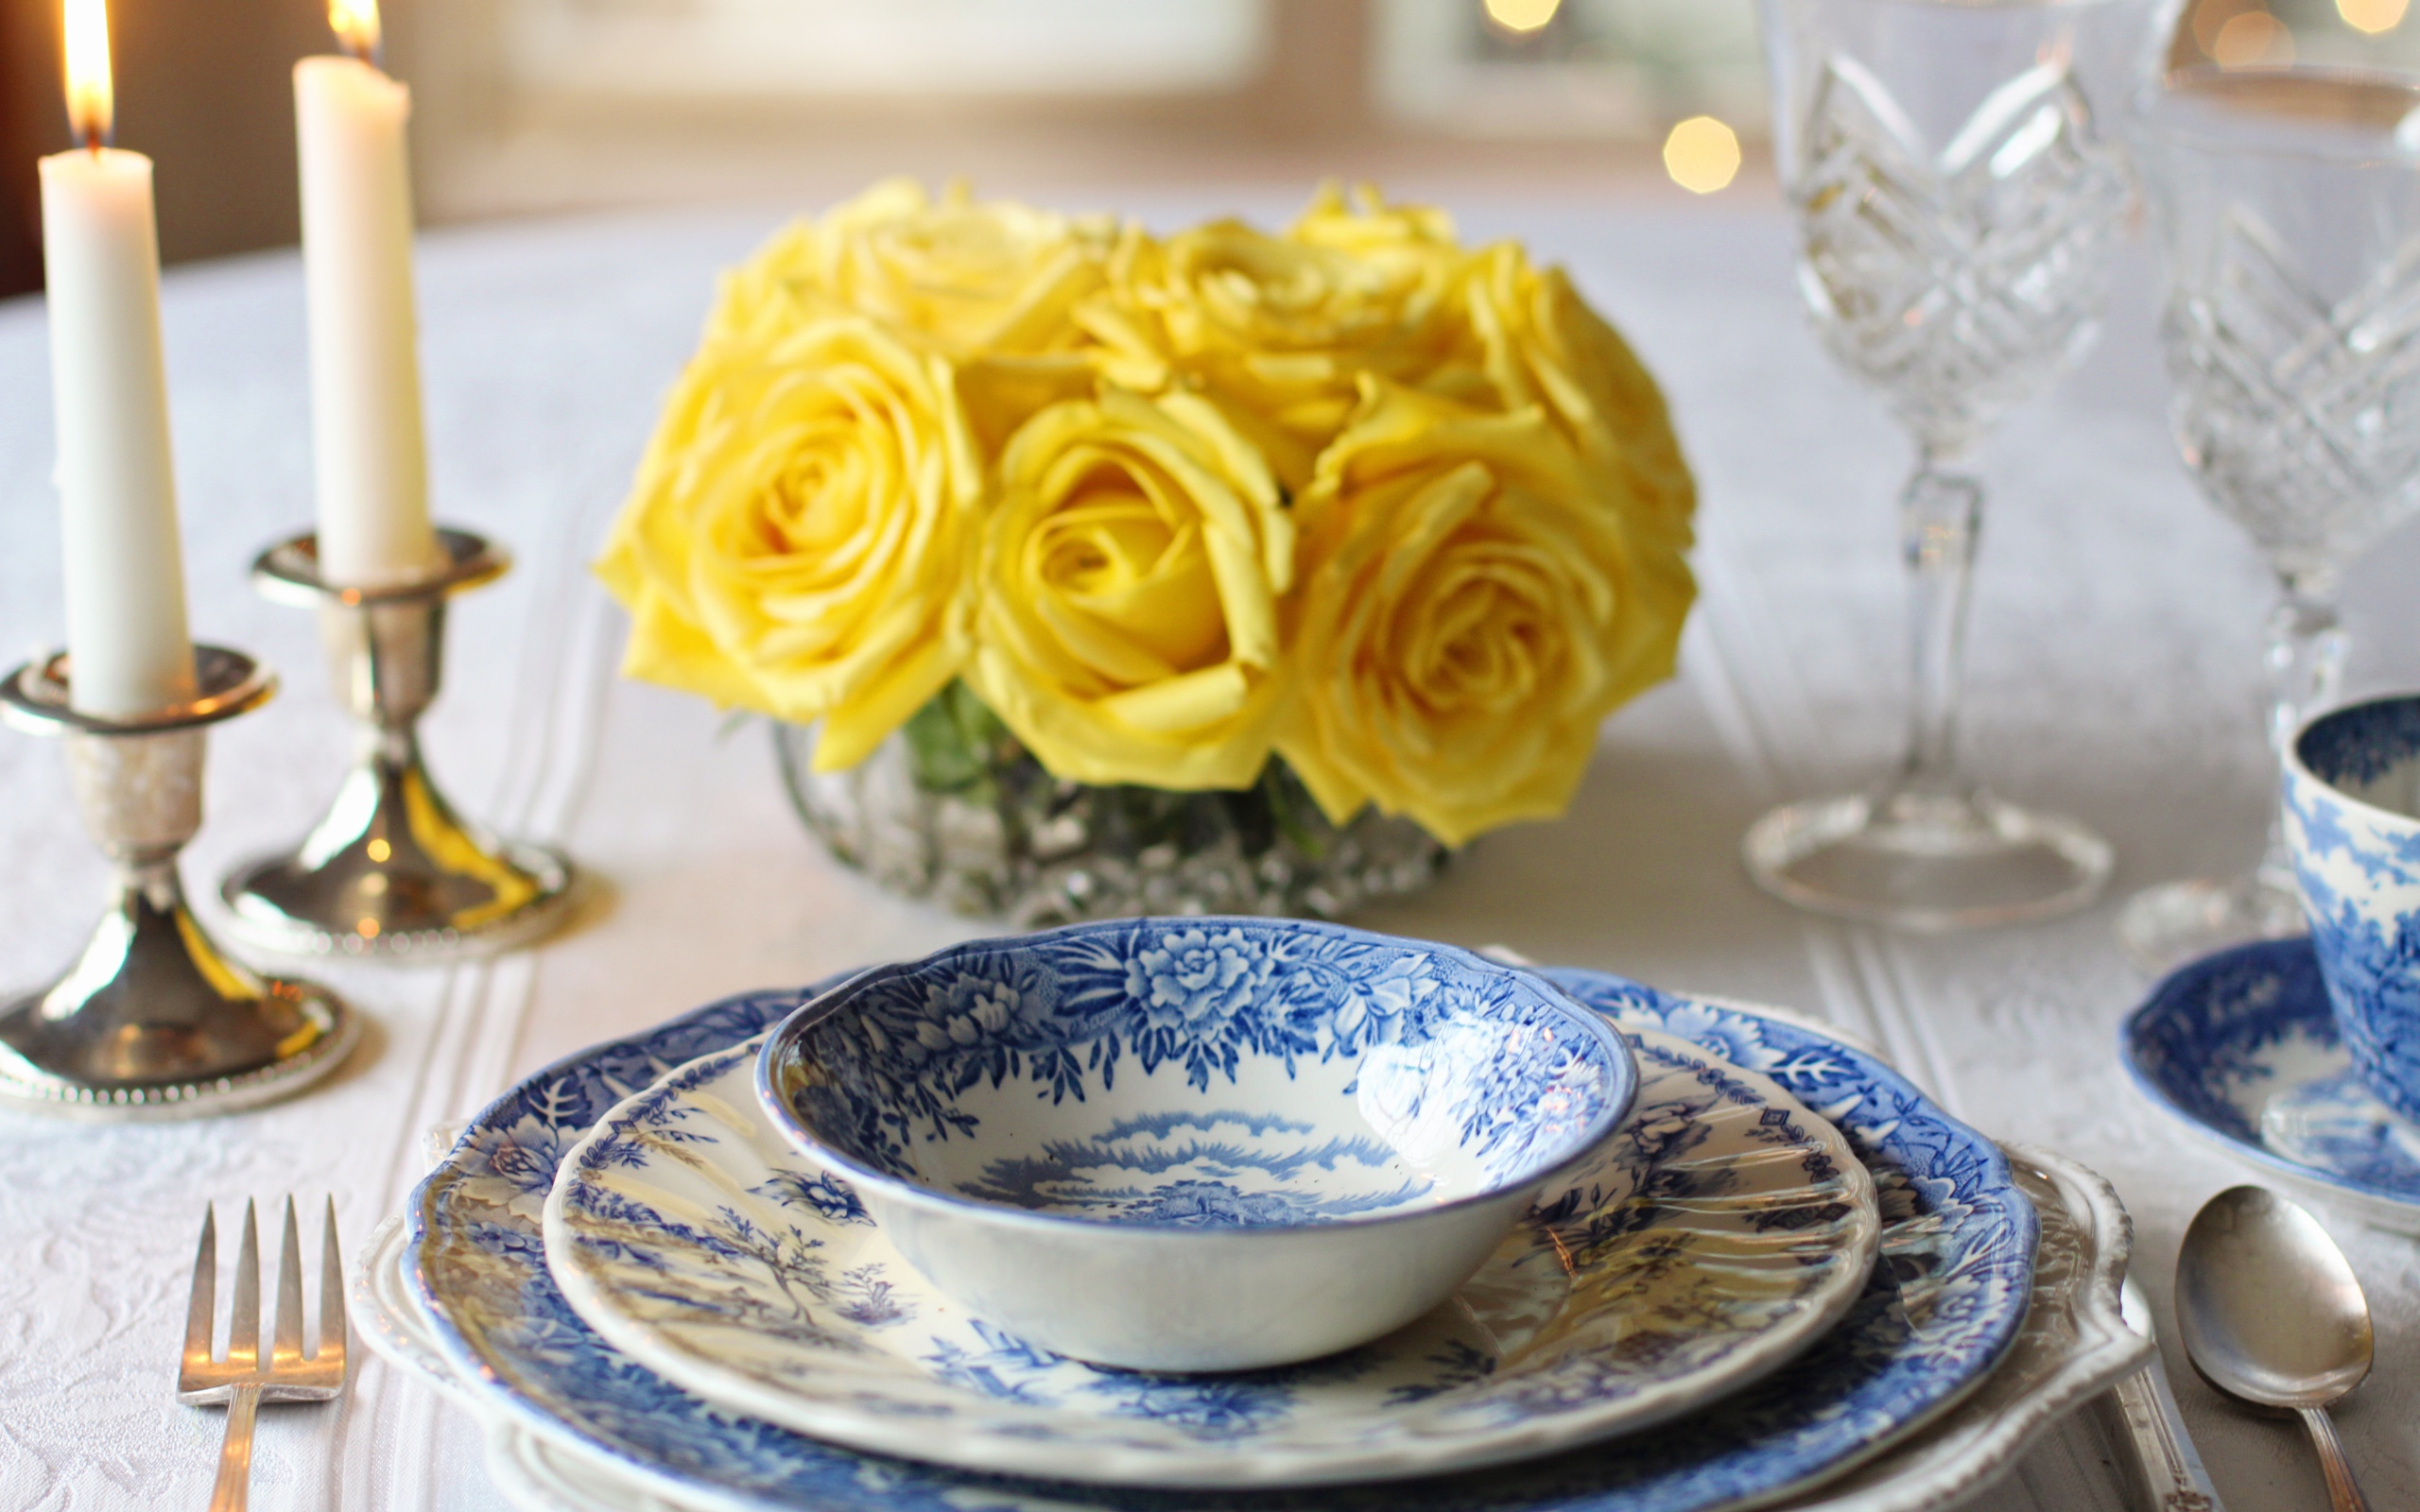 Beautiful dishes on the table with a bouquet of roses and candles